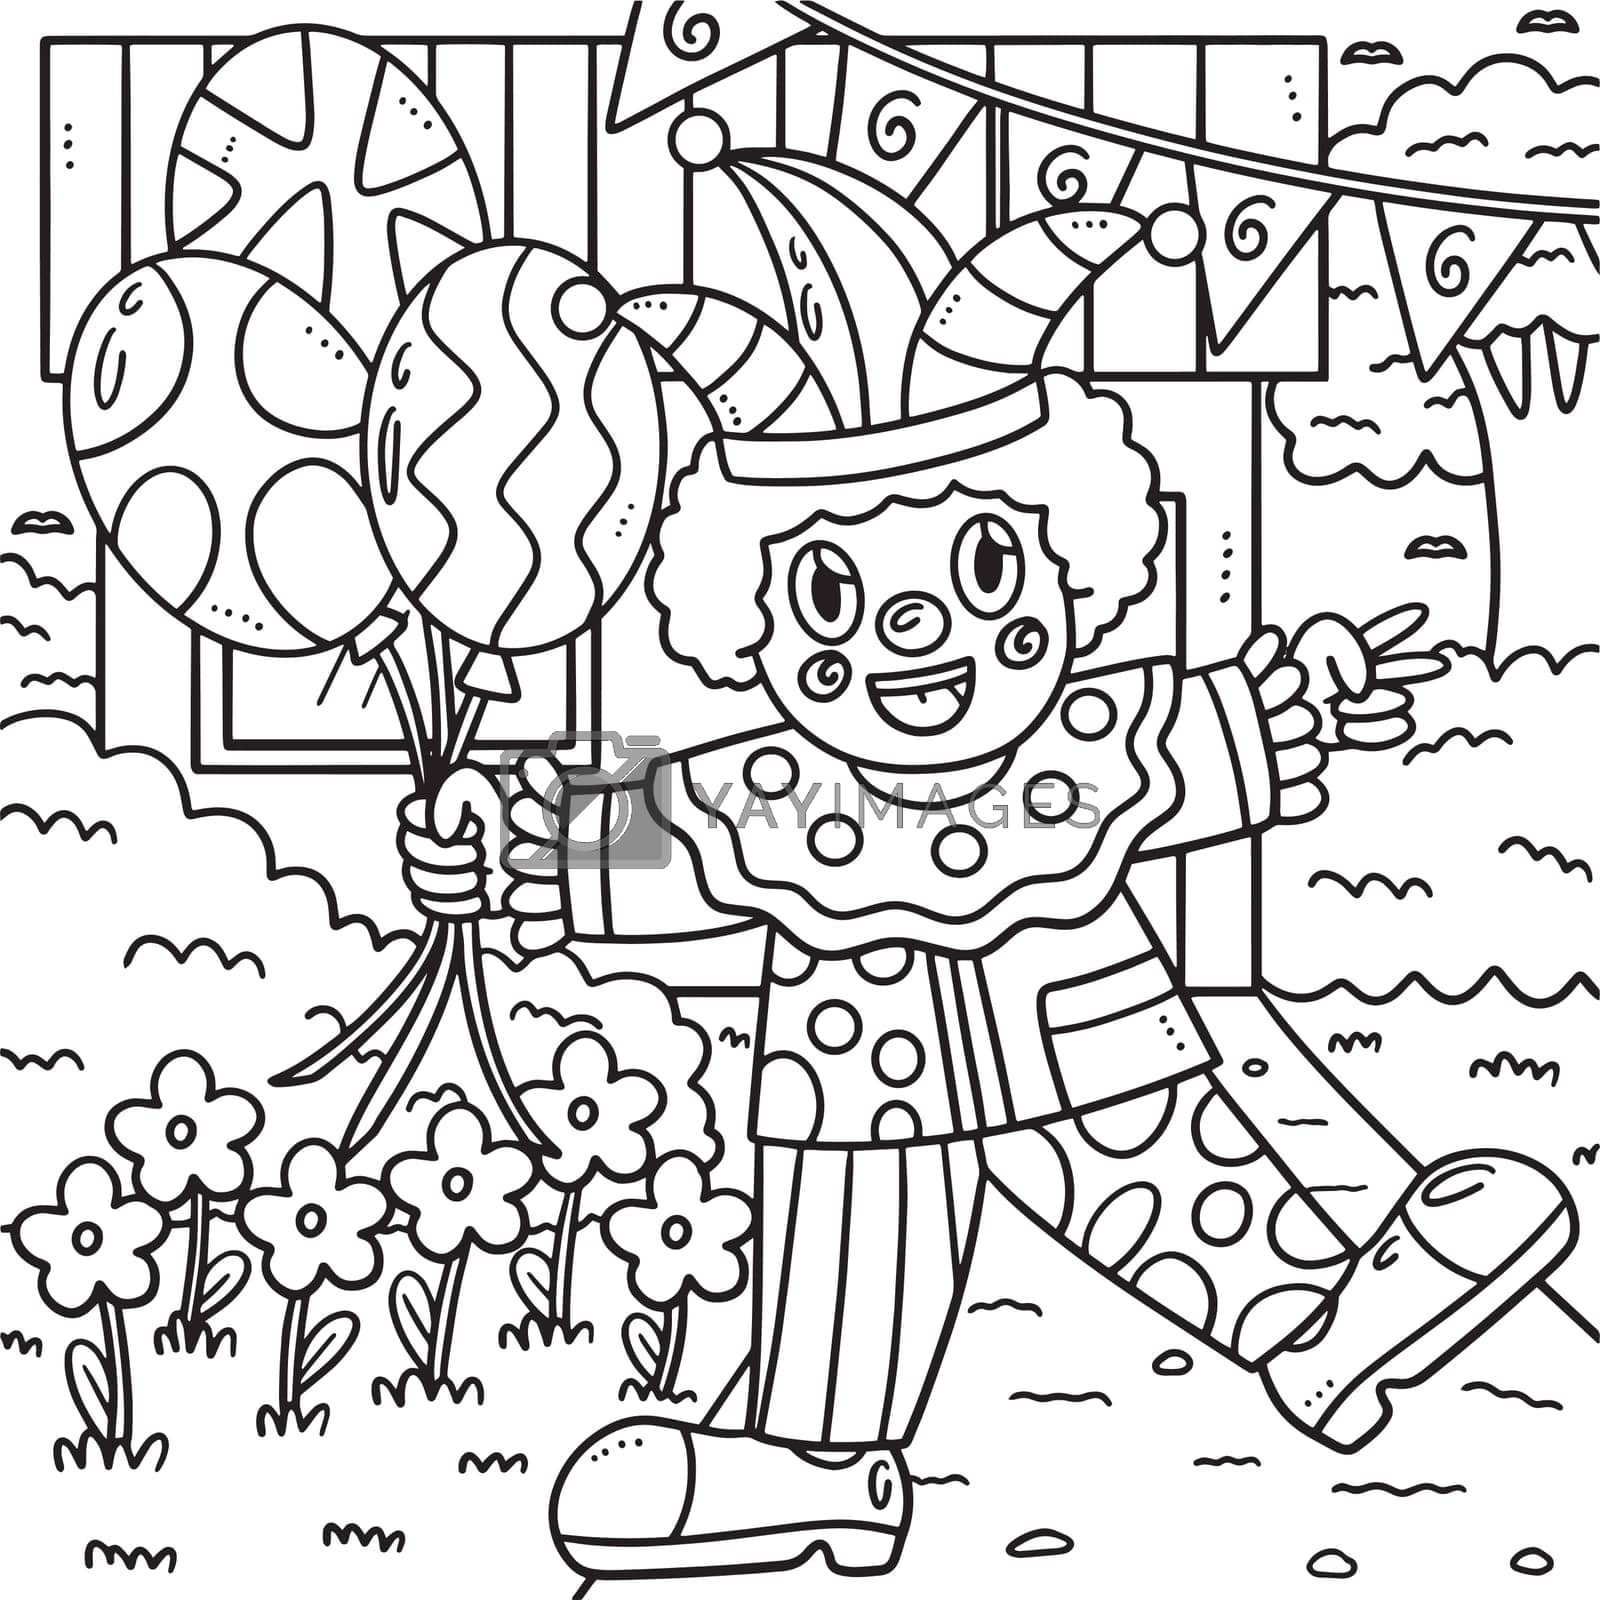 Royalty free image of Birthday Clown with Balloon Coloring Page for Kids by abbydesign